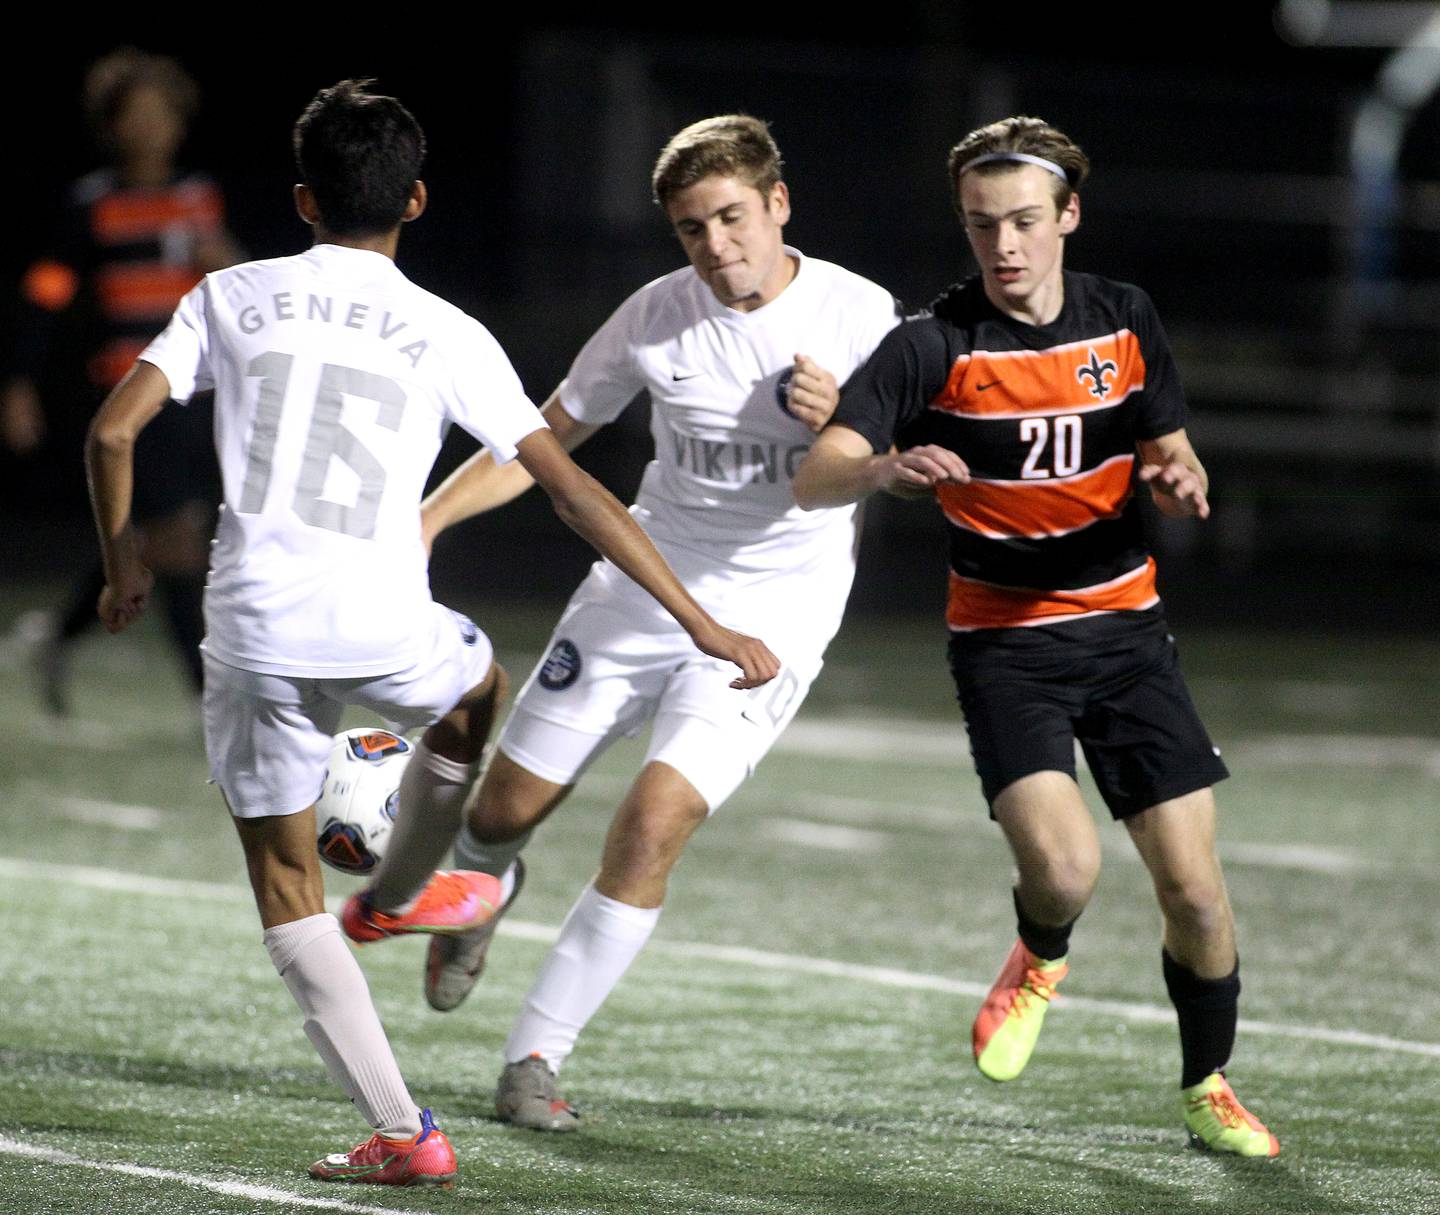 Geneva's Nicolas Plata (16) and Nathan Branstad (10) get the ball away from St. Charles East's Mason Brockmeyer (20) during the Class 3A Addison Trail Sectional semifinal Wednesday, Oct. 27, 2021.